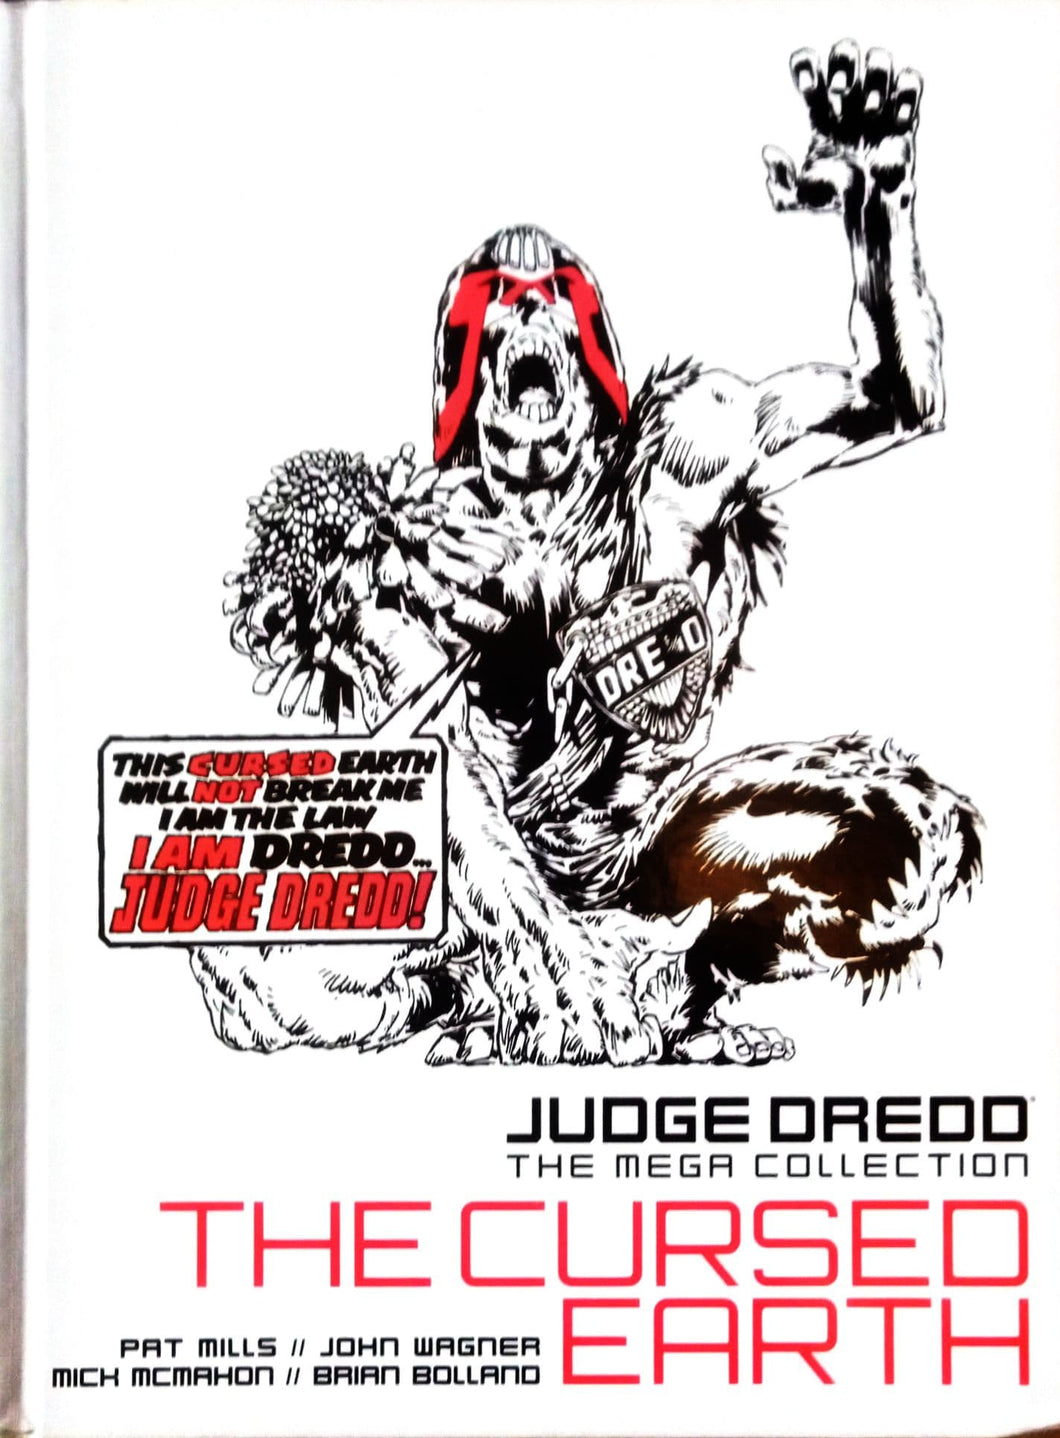 JUDGE DREDD The Mega Collection THE CURSED EARTH spine number 32